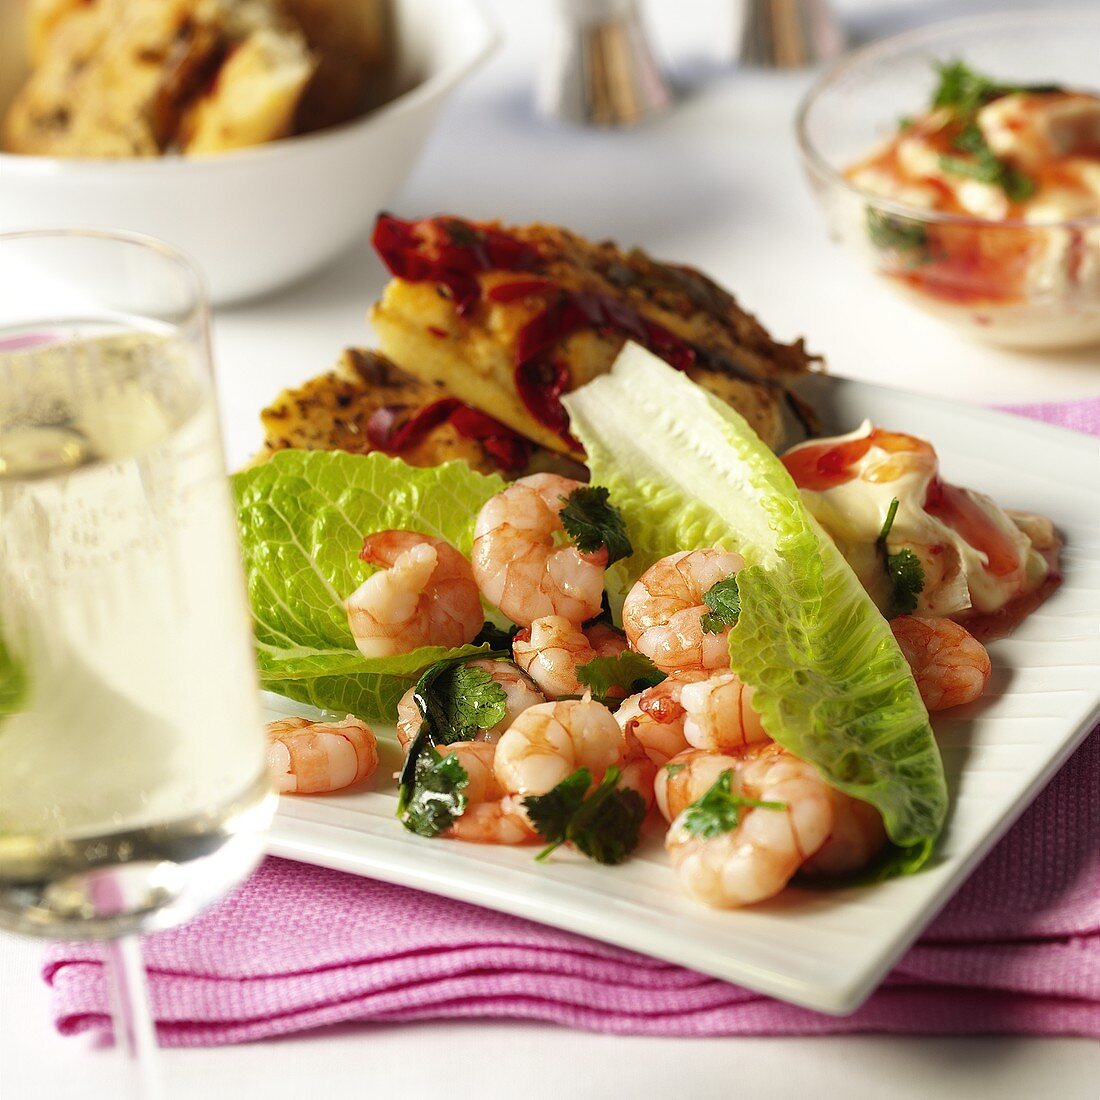 Shrimps with lettuce leaves, pepper sauce & chili bread